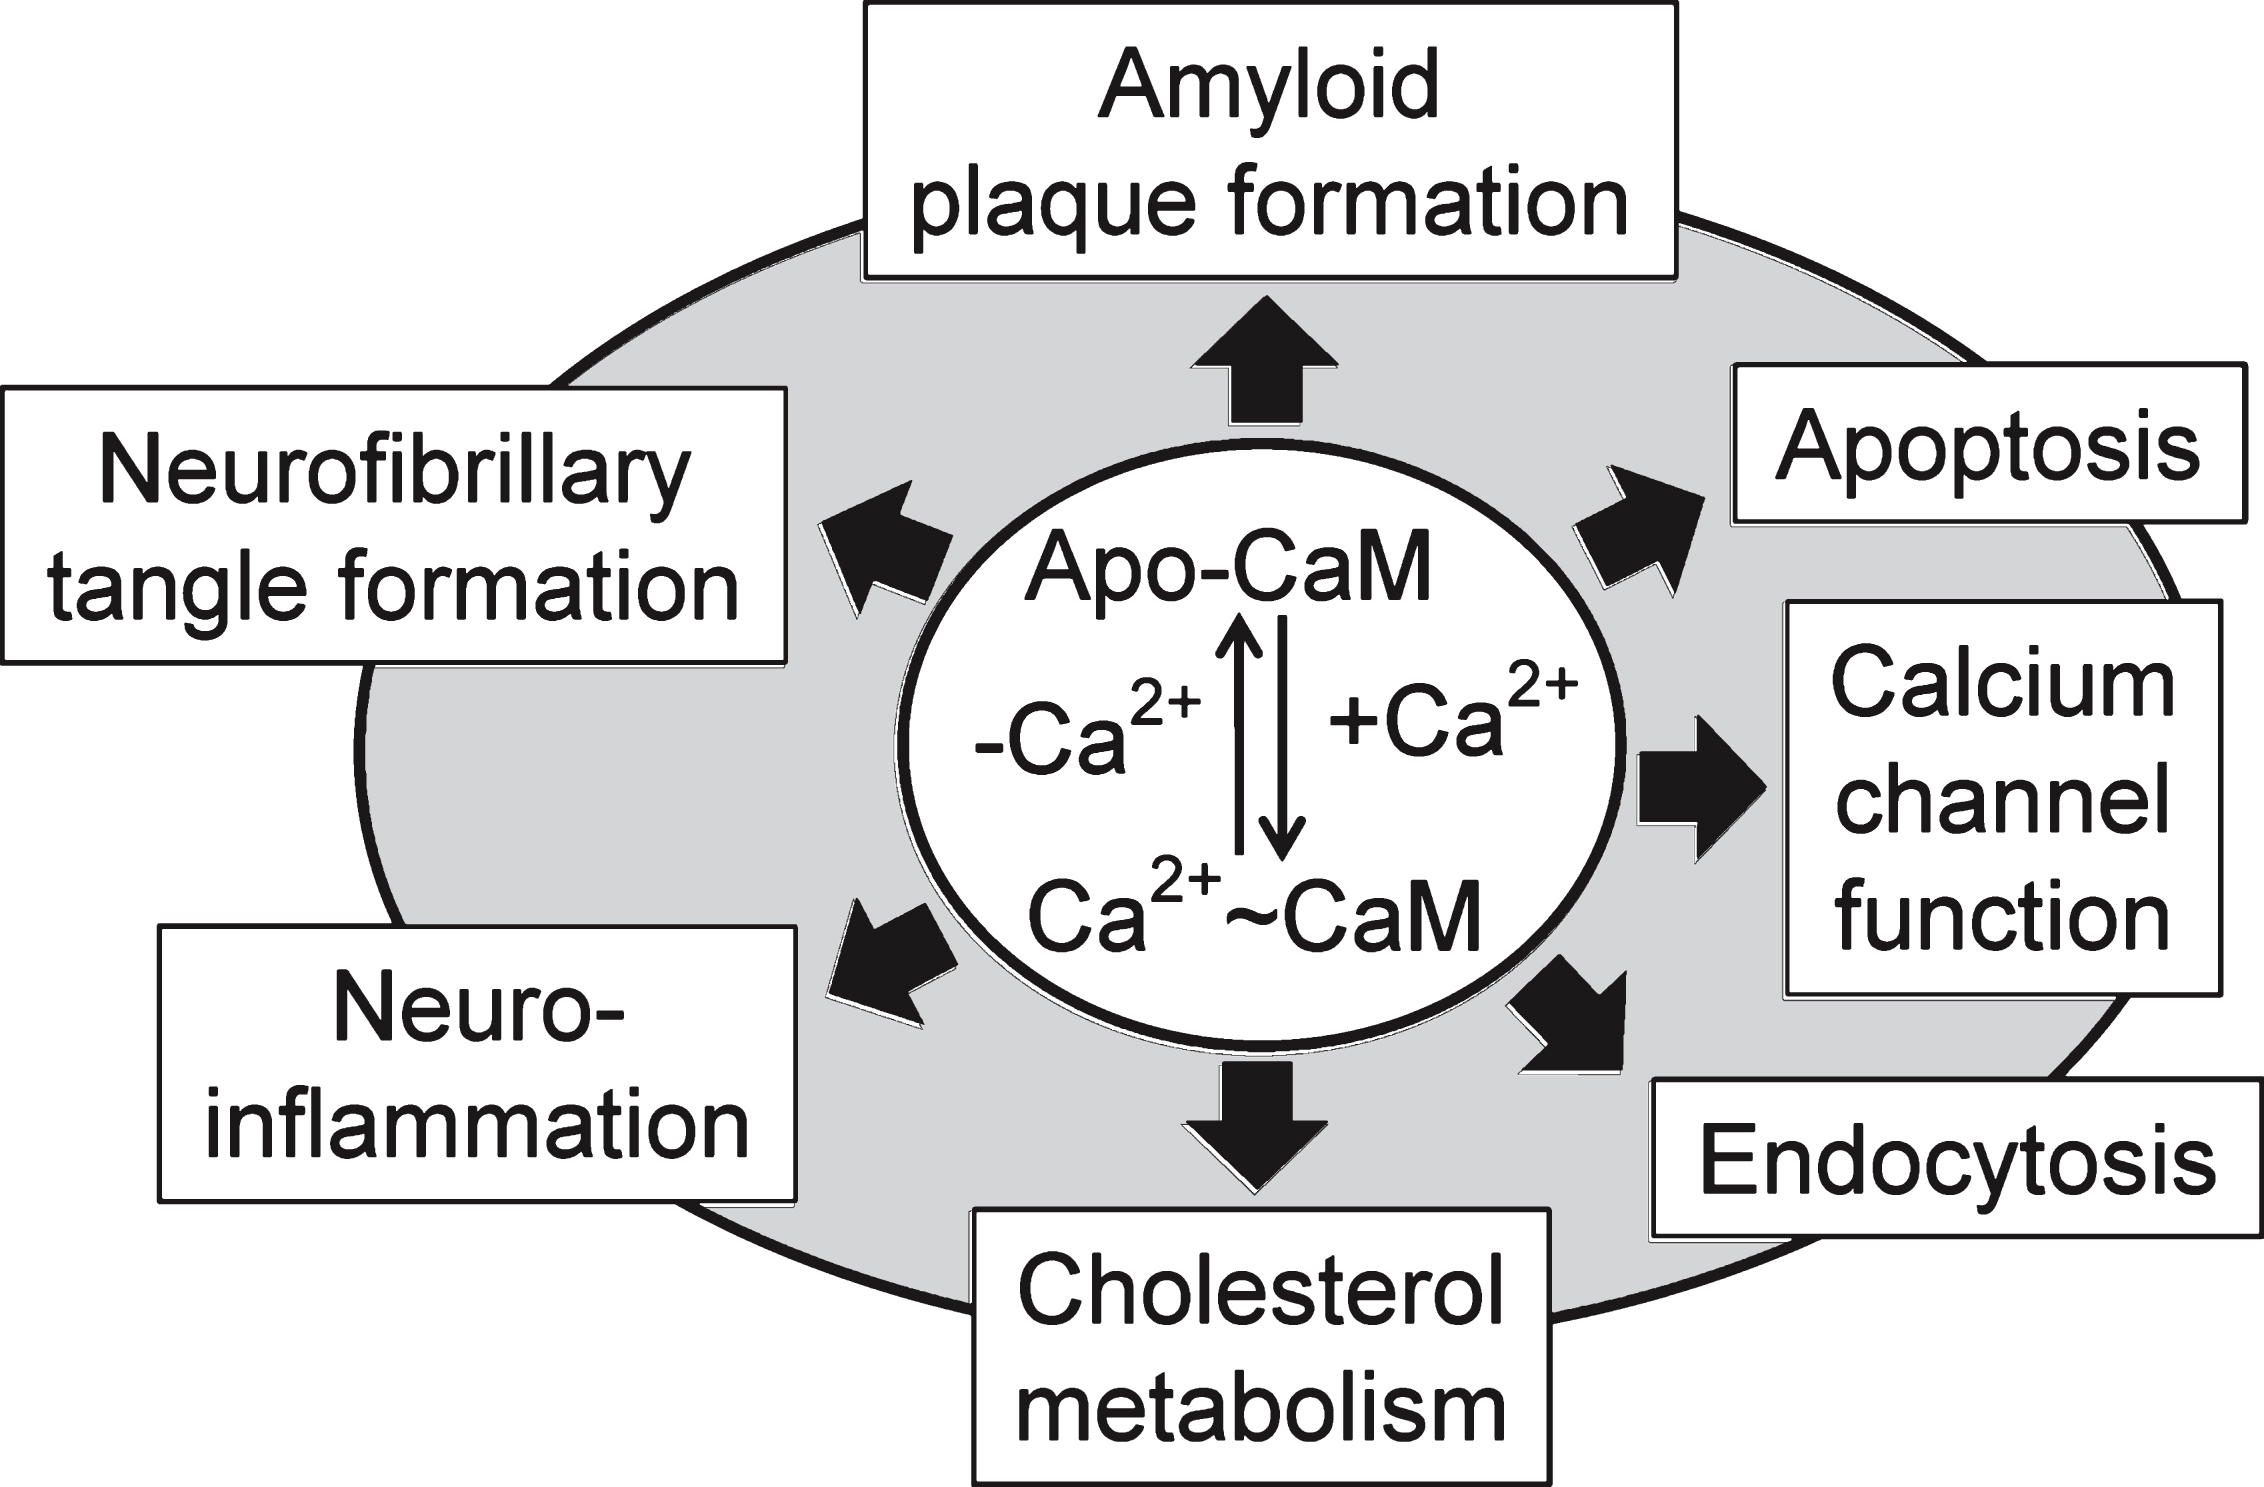 Calcium-bound calmodulin (CaM) and its calcium-free form (Apo-CaM) are involved to many central events linked to Alzheimer’s disease as discussed in this review.